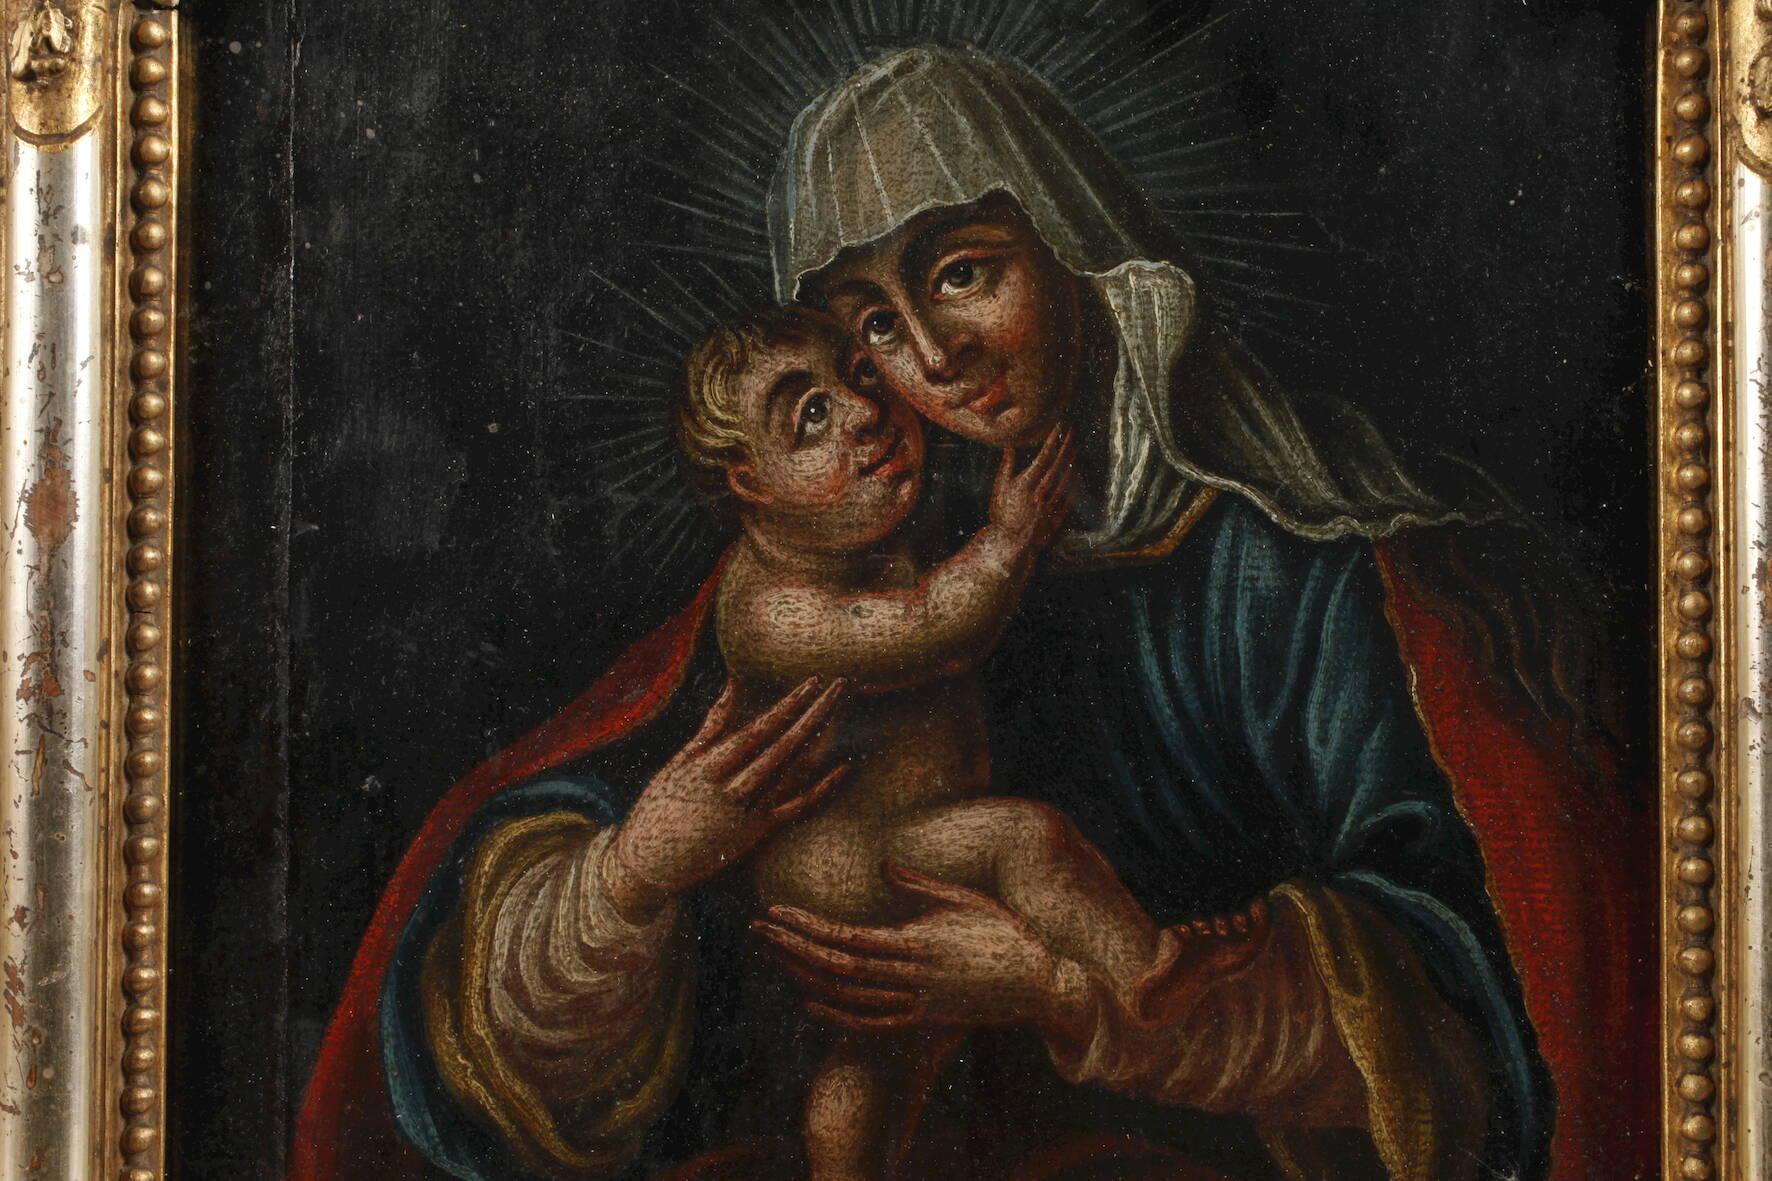 FINE 18TH CENTURY GERMAN OLD MASTER OIL PAINTING - THE MADONNA & INFANT CHRIST - Painting by German Master